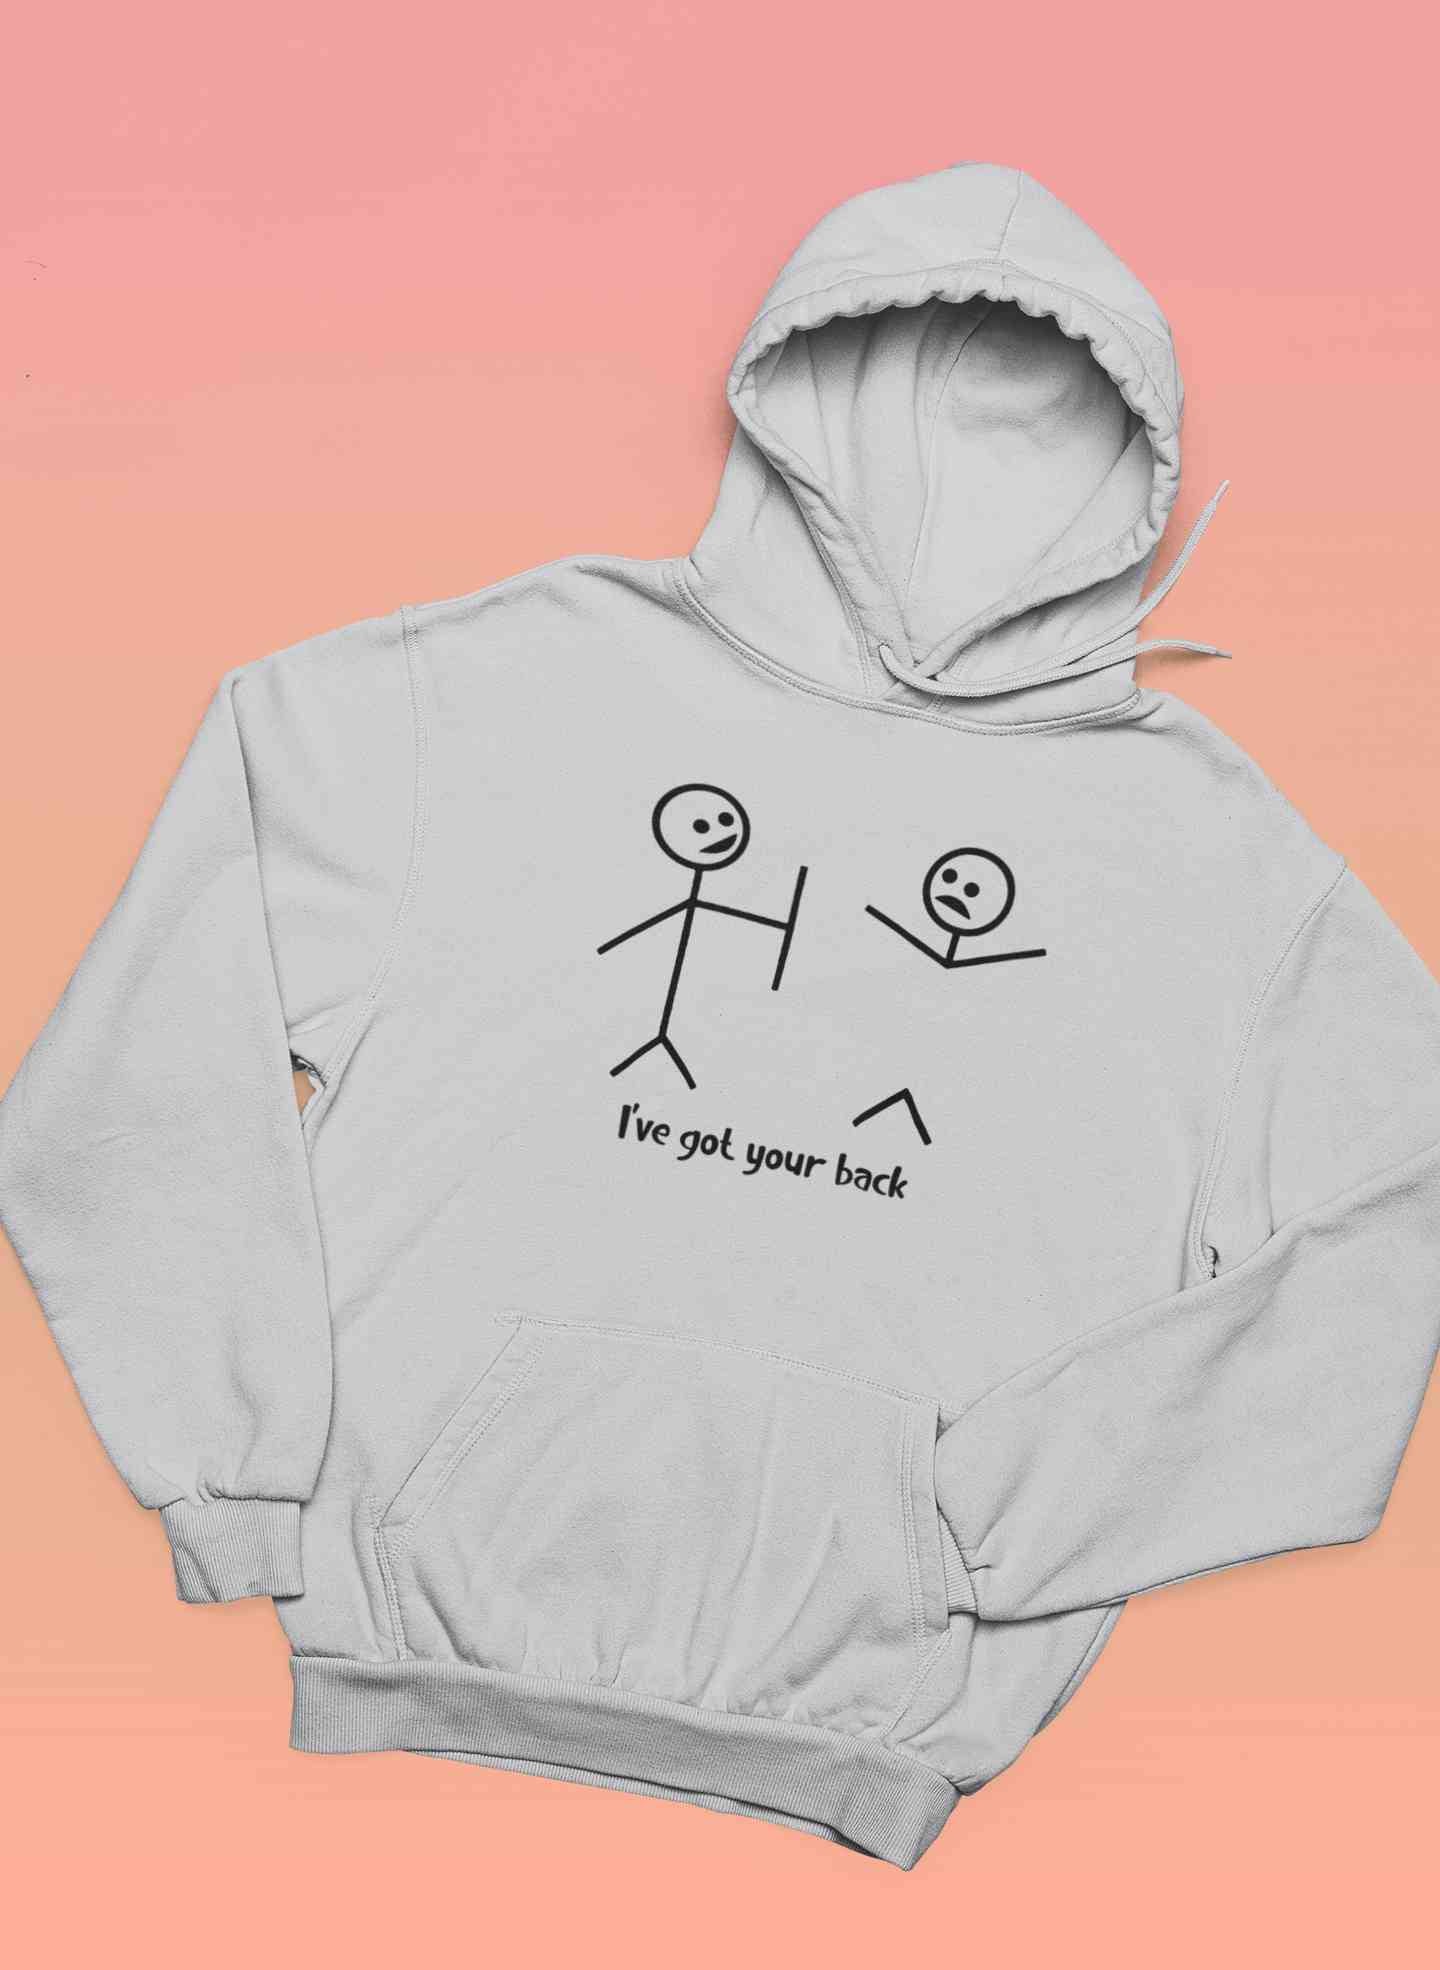 I Have Got Your Back Funny Hoodies for Women-FunkyTeesClub